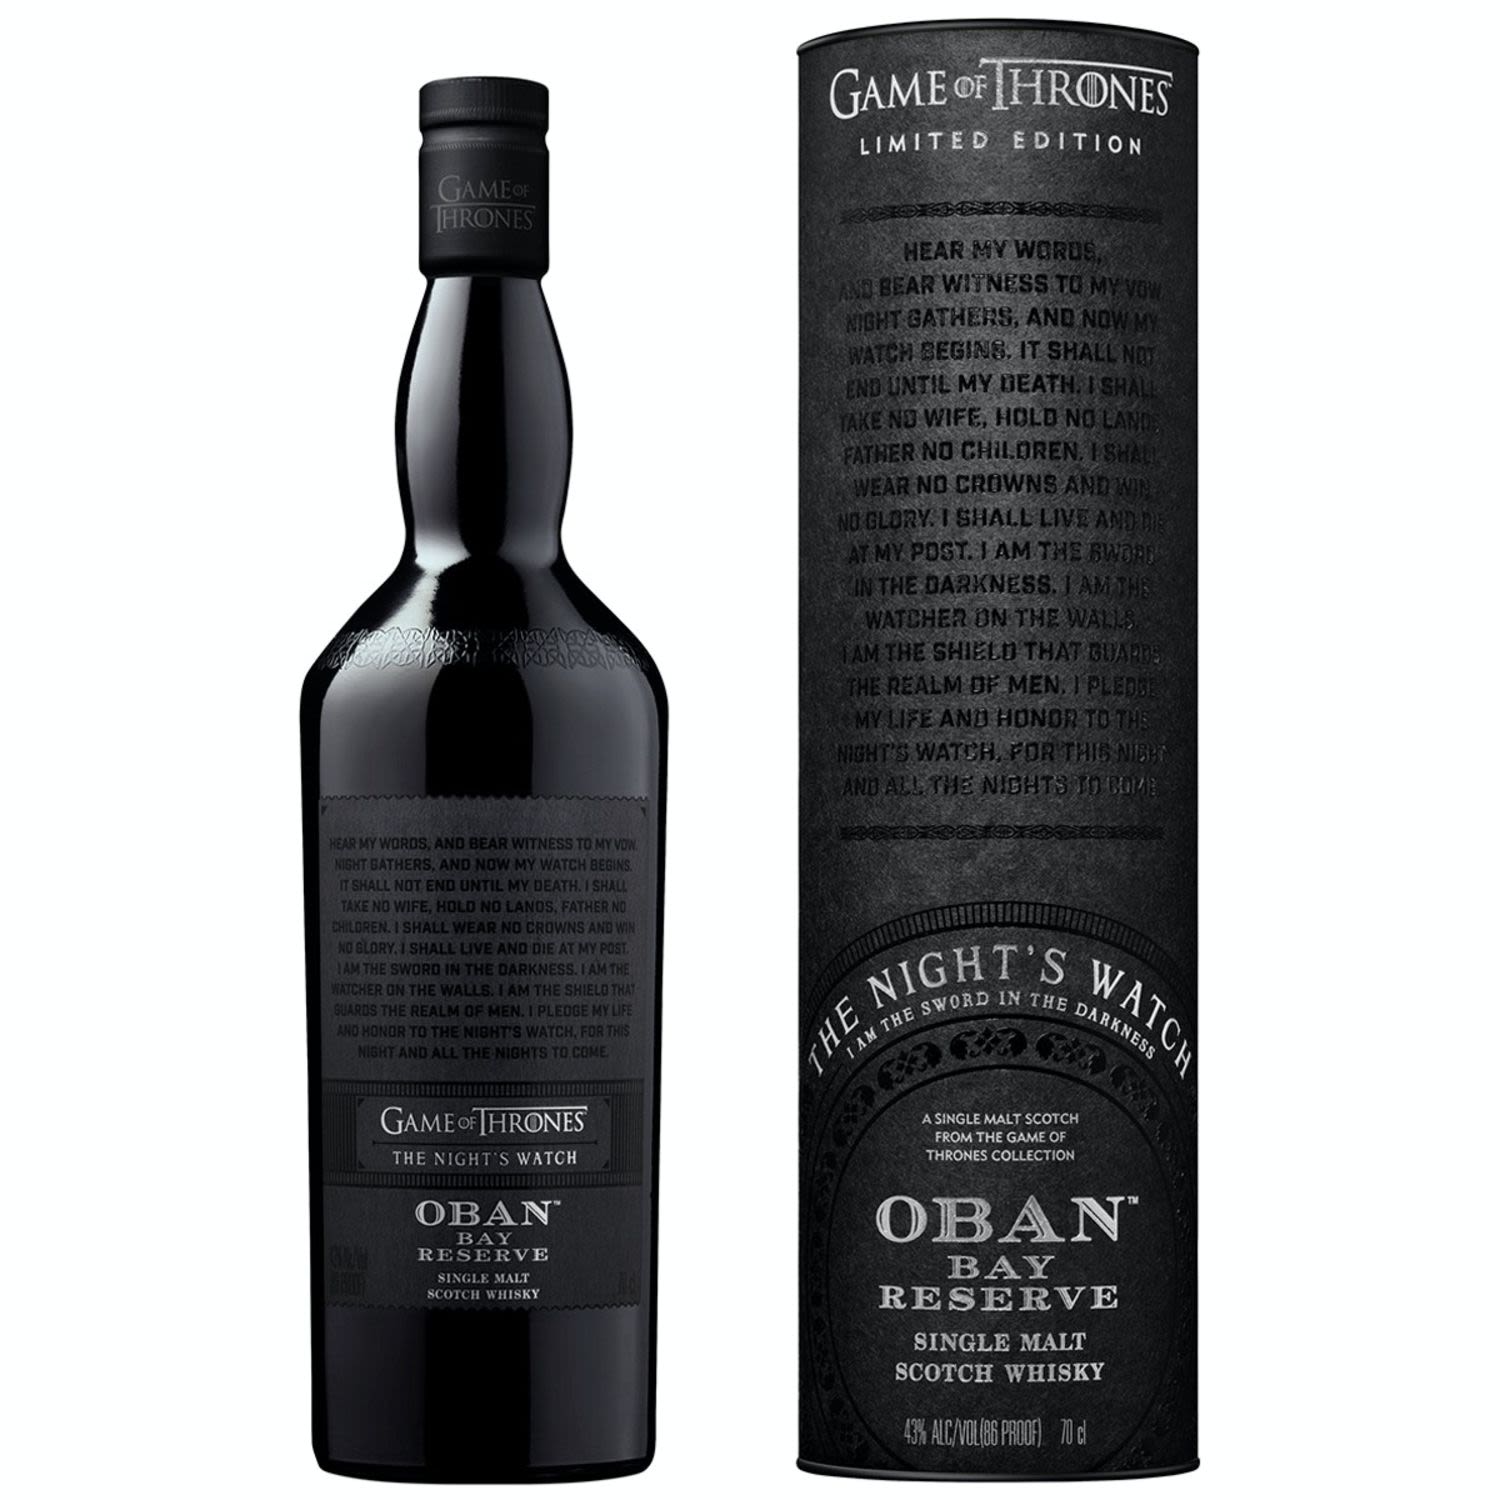 Game of Thrones The Night's Watch - Oban Bay Reserve Scotch Whisky 700mL Bottle